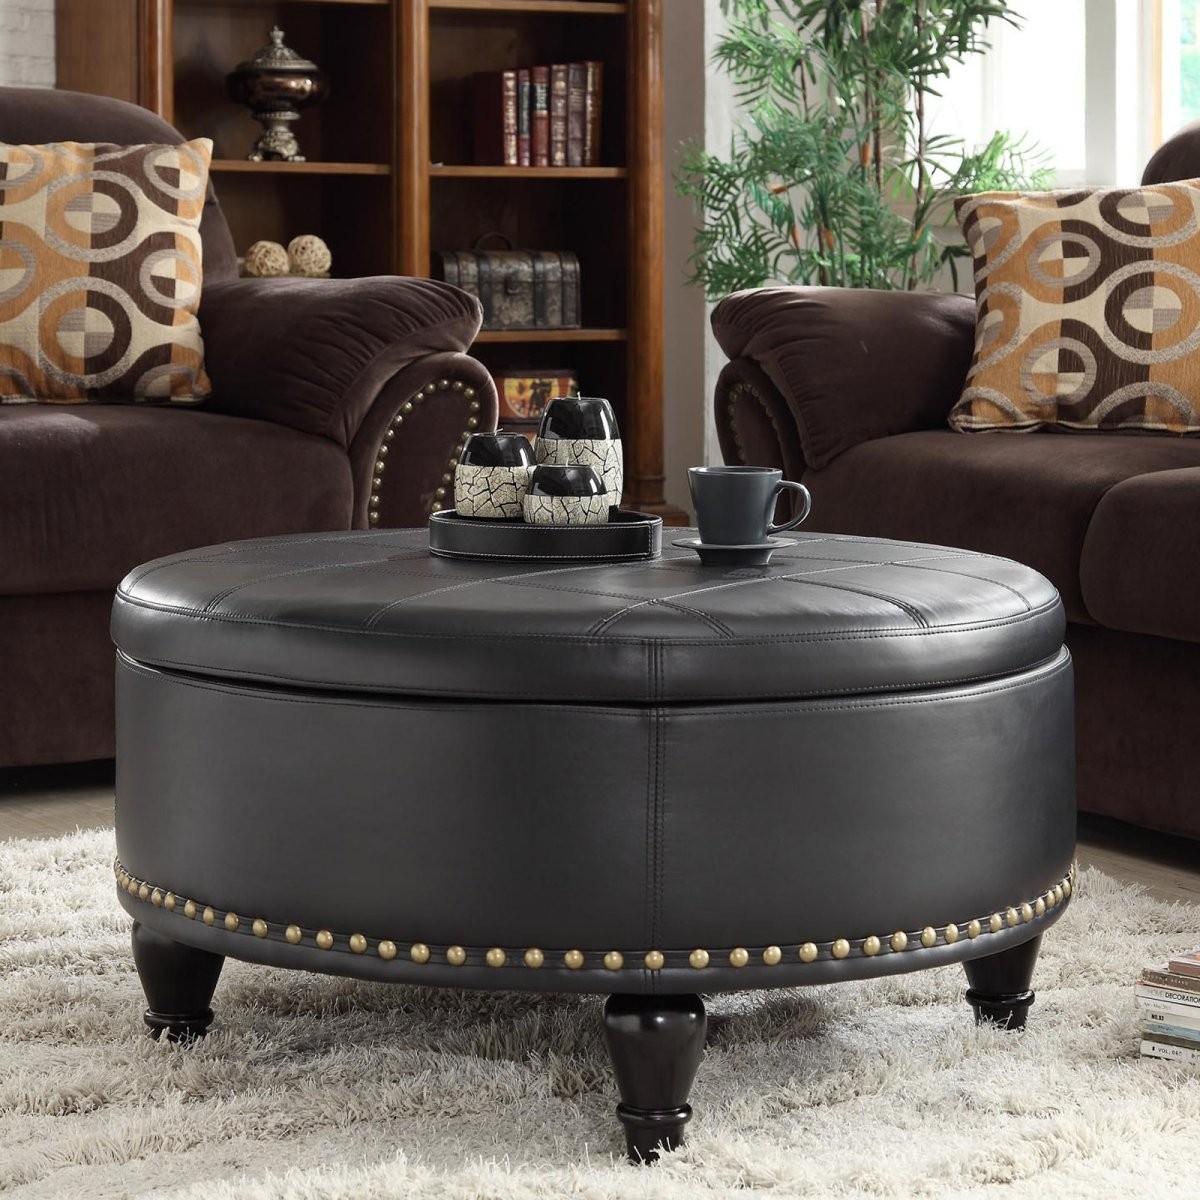 Unique and creative tufted leather ottoman coffee table 1